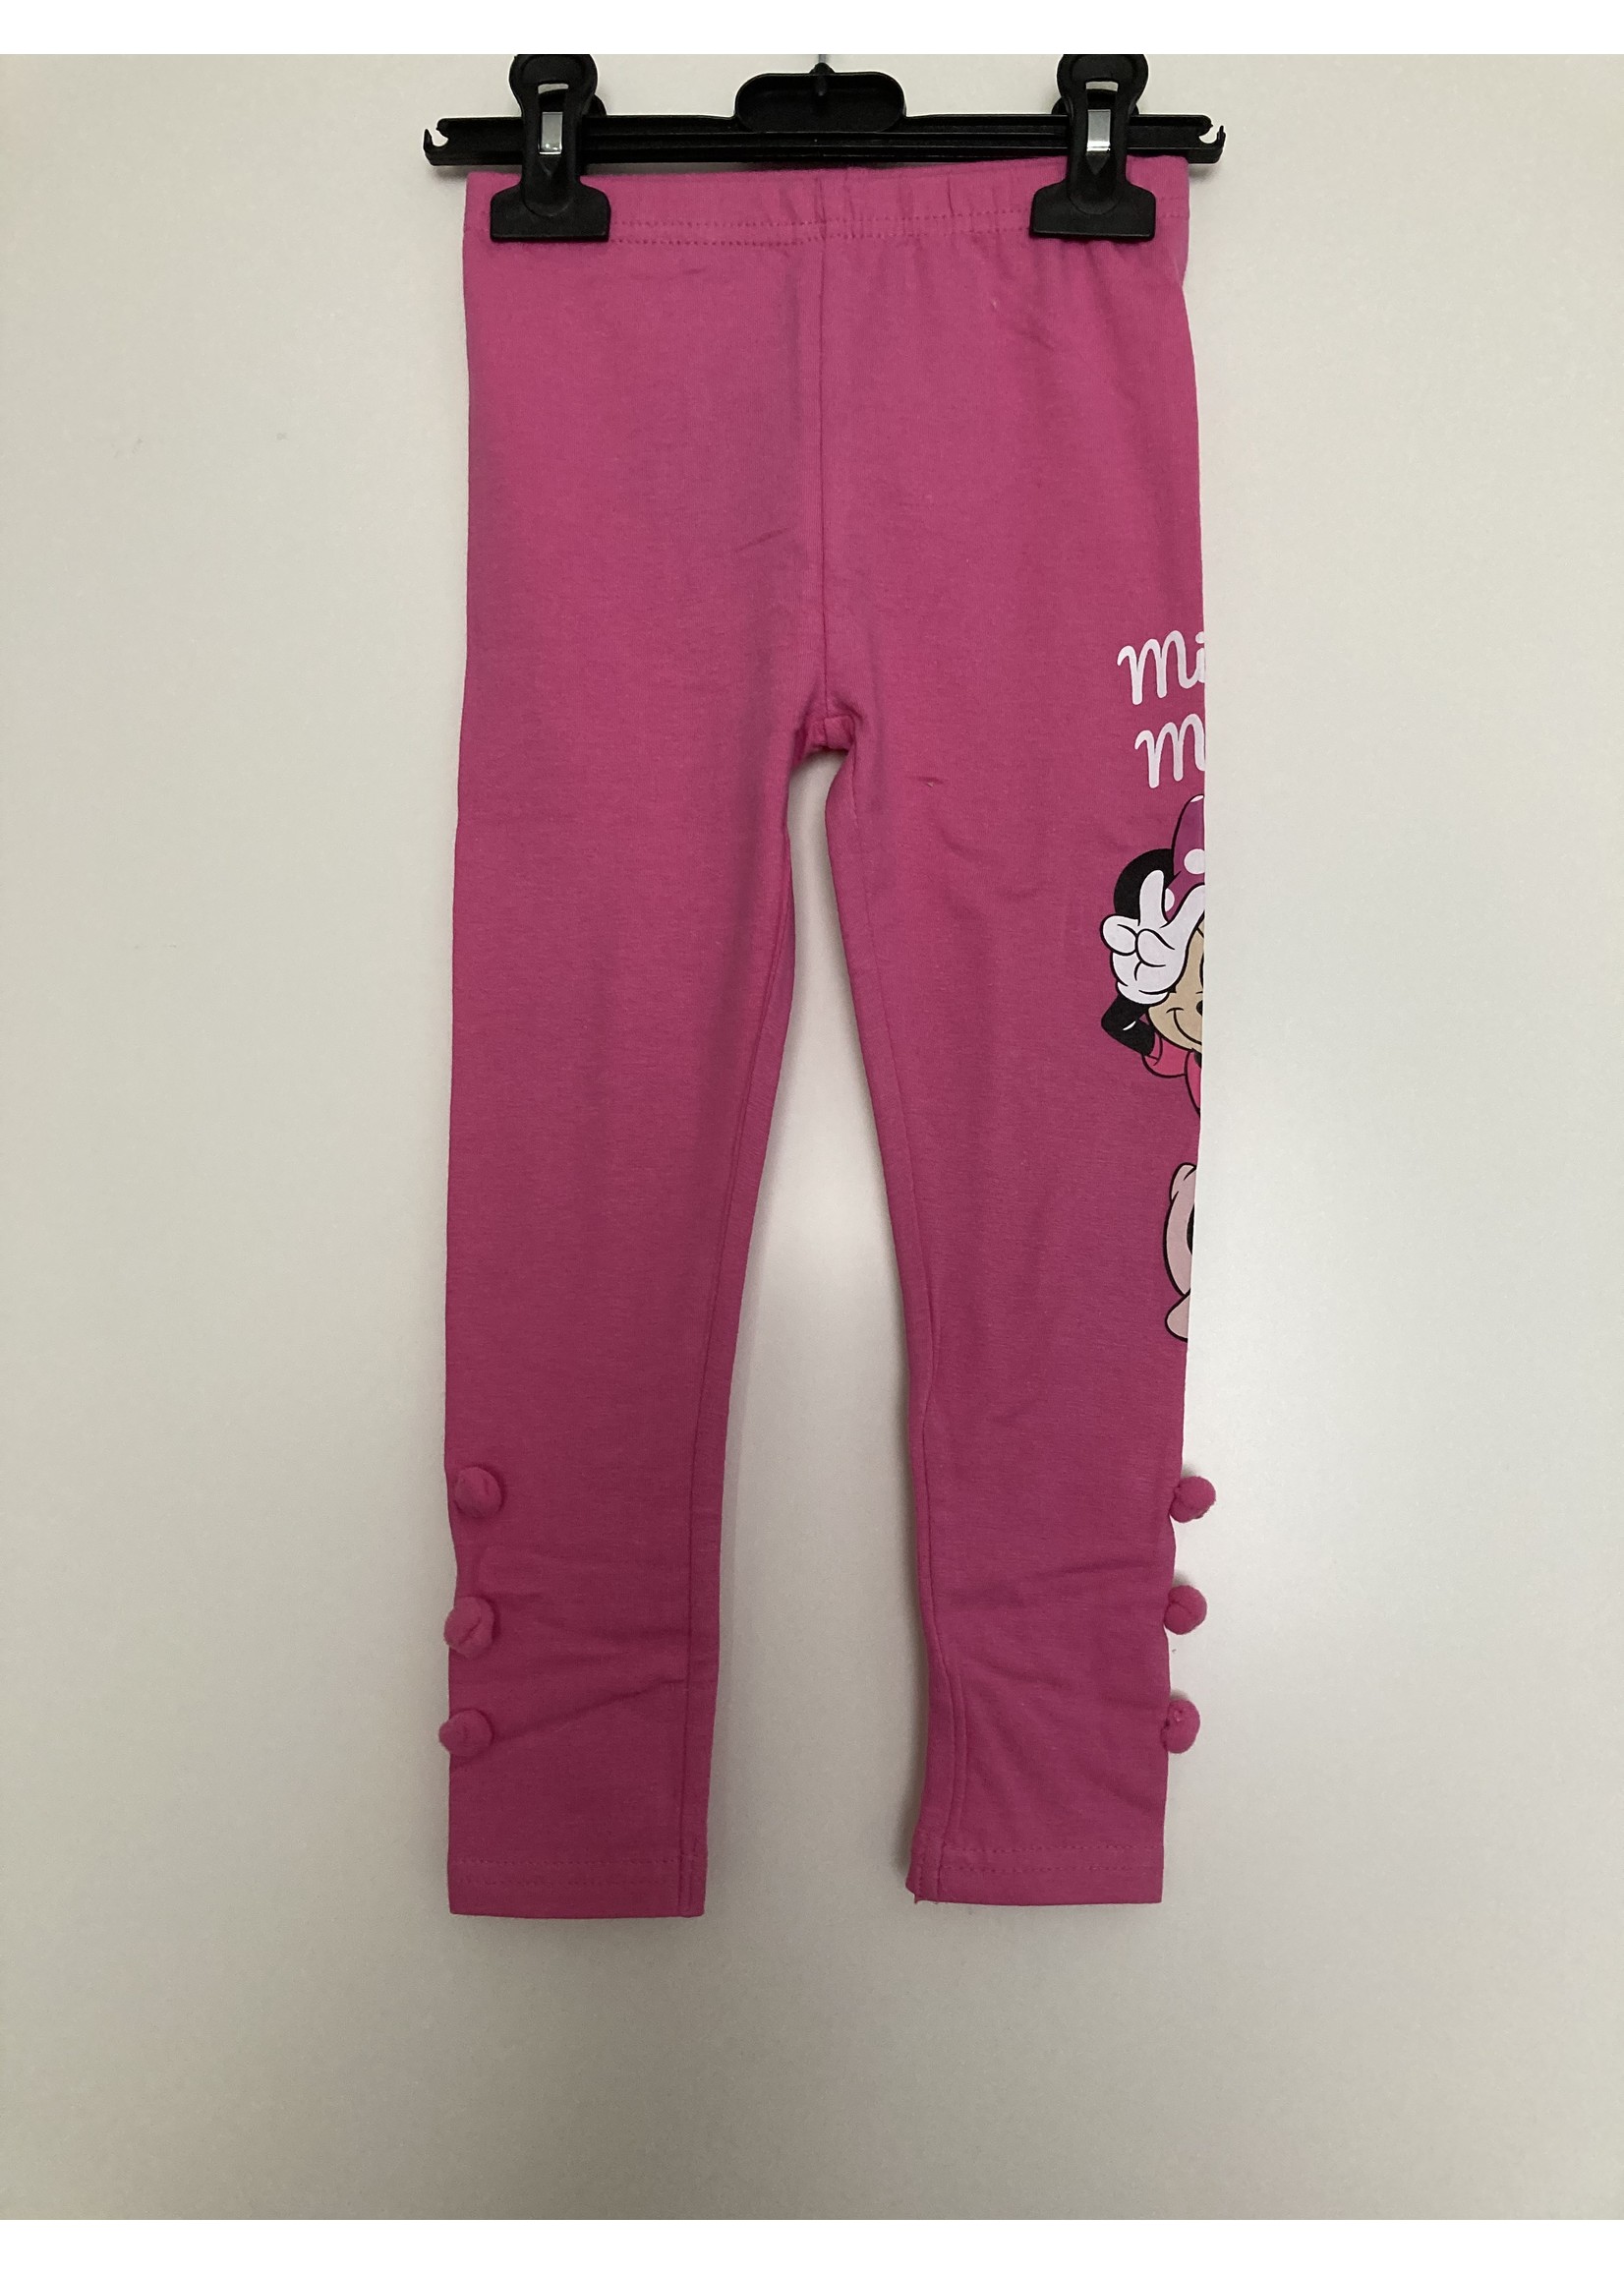 Disney Minnie Mouse leggings from Disney pink